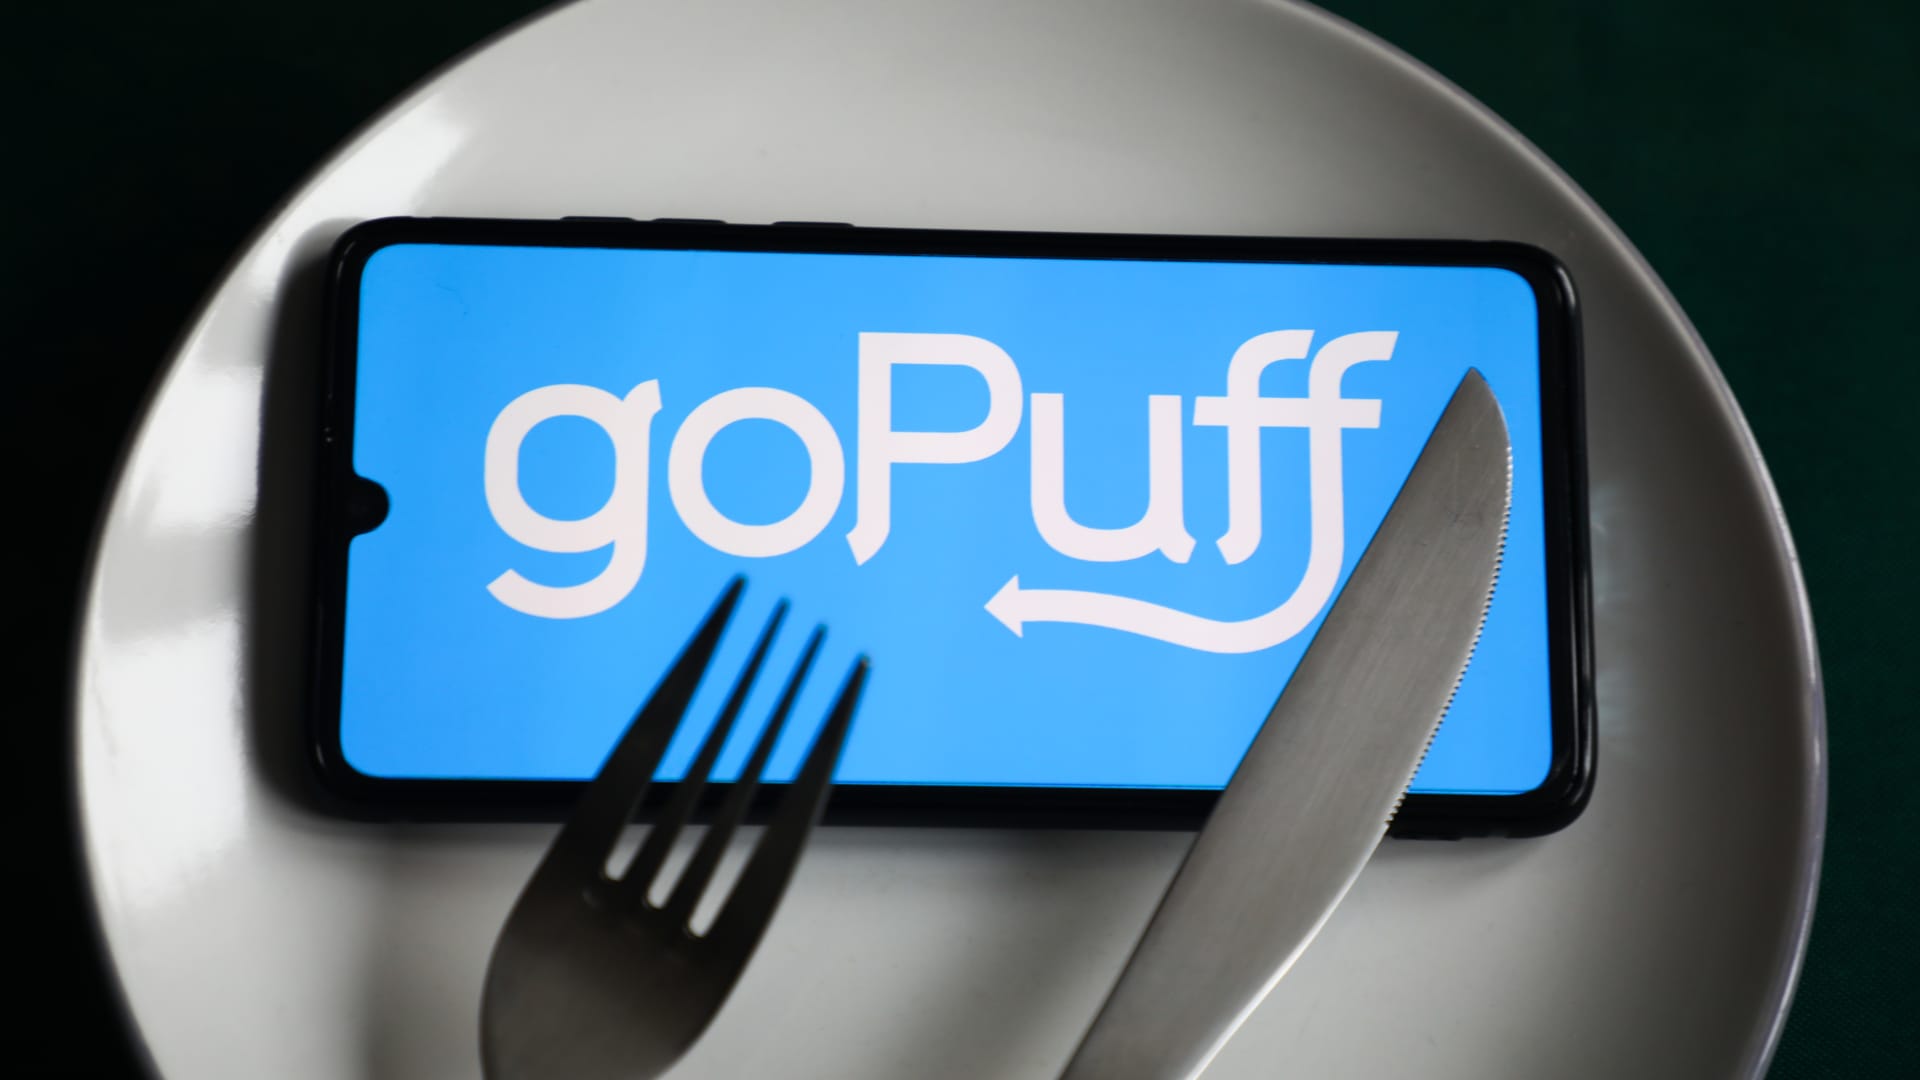 GoPuff app logo is displayed on a mobile phone screen.